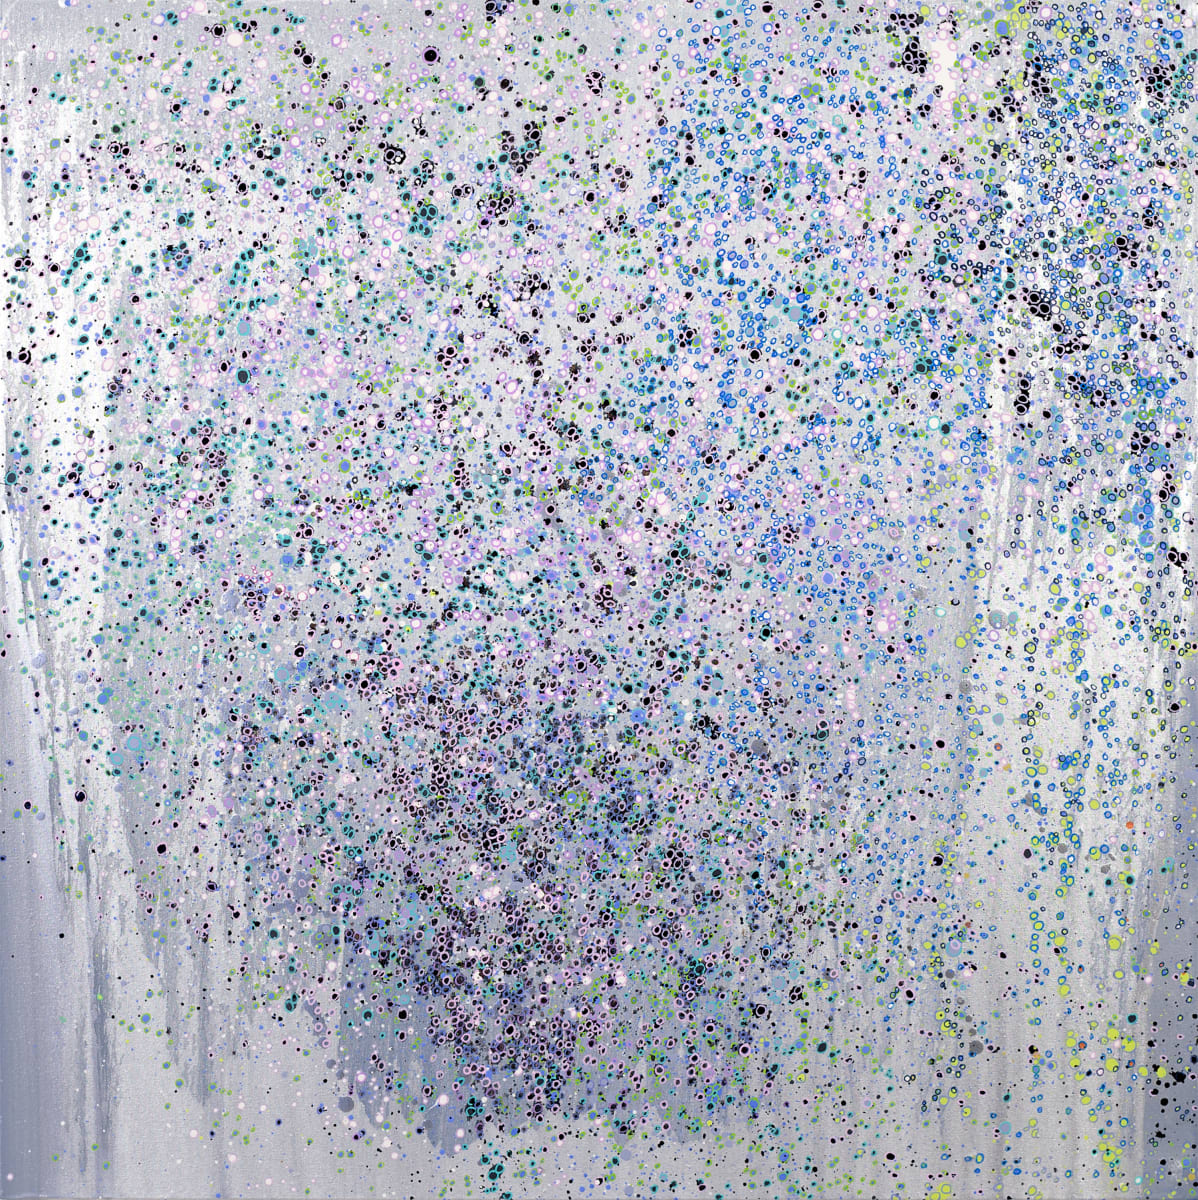 Lavender Mist by Leslie Parke  Image: "Lavender Mist," 48 inches x 48 inches, oil paint and acrylic markers on canvas, © 2022 Leslie Parke